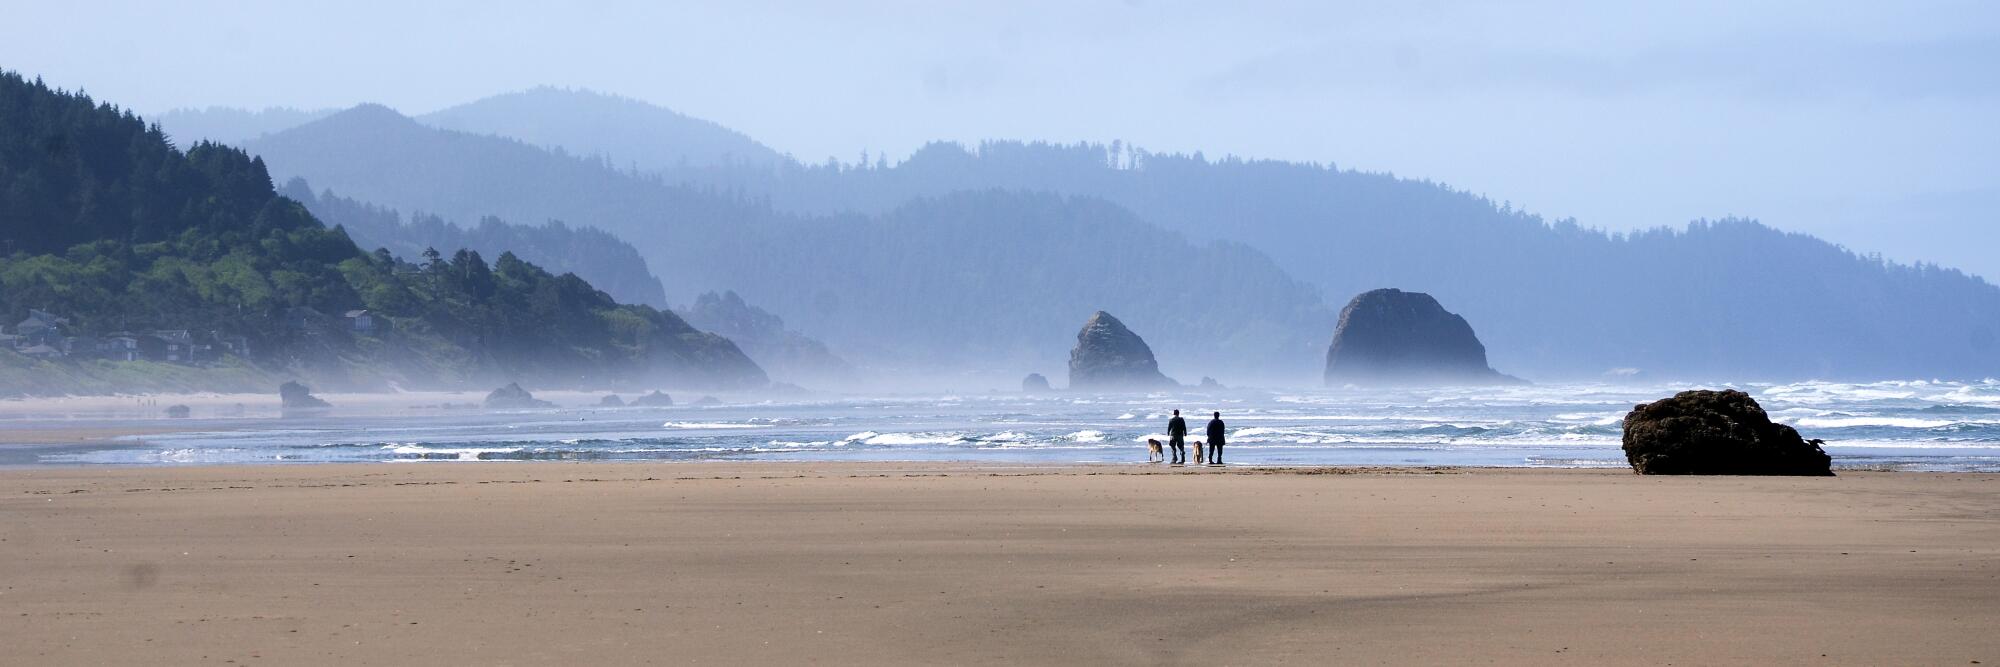 Cannon Beach, Ore., with two people and two dogs on the sand near waves, big rocks and tree-covered hills.